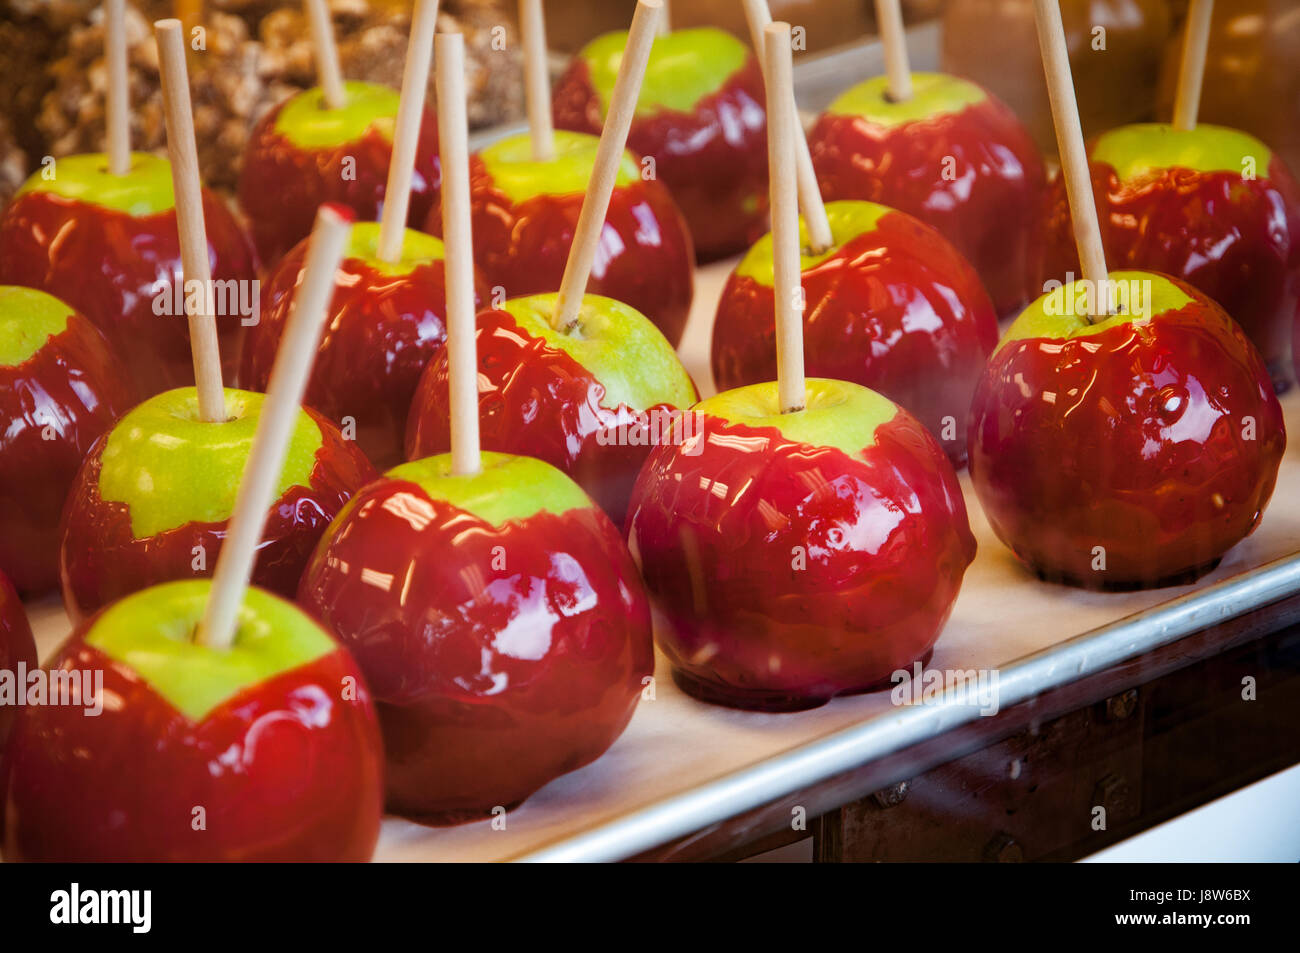 Toffee apples on shop counter, close-up Stock Photo